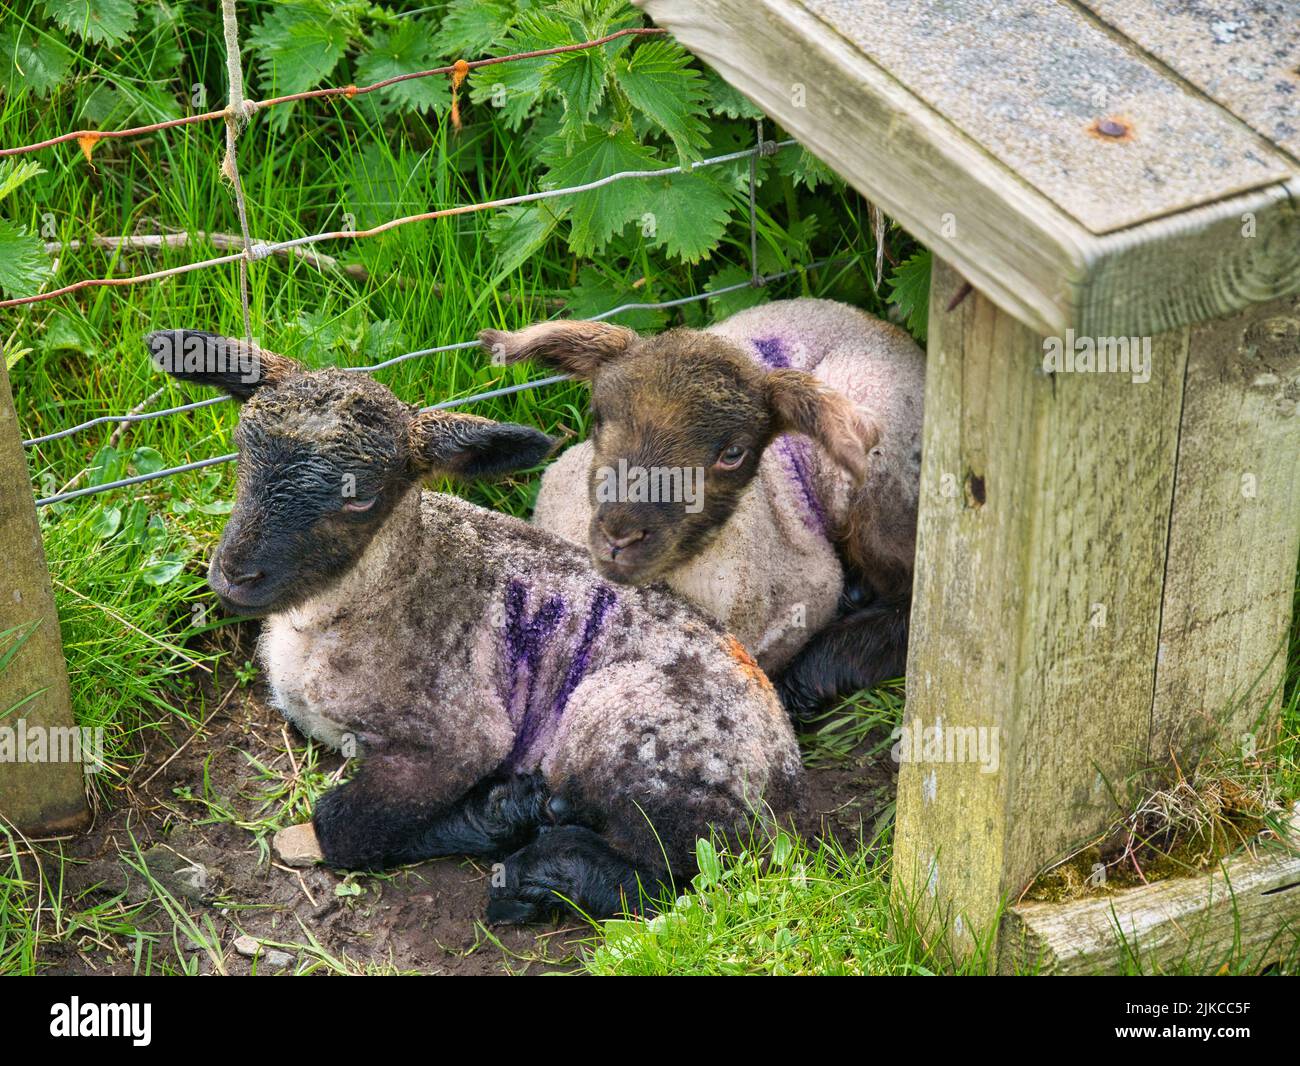 A close up of two new born lambs sheltering under a stile at a fence. Stock Photo